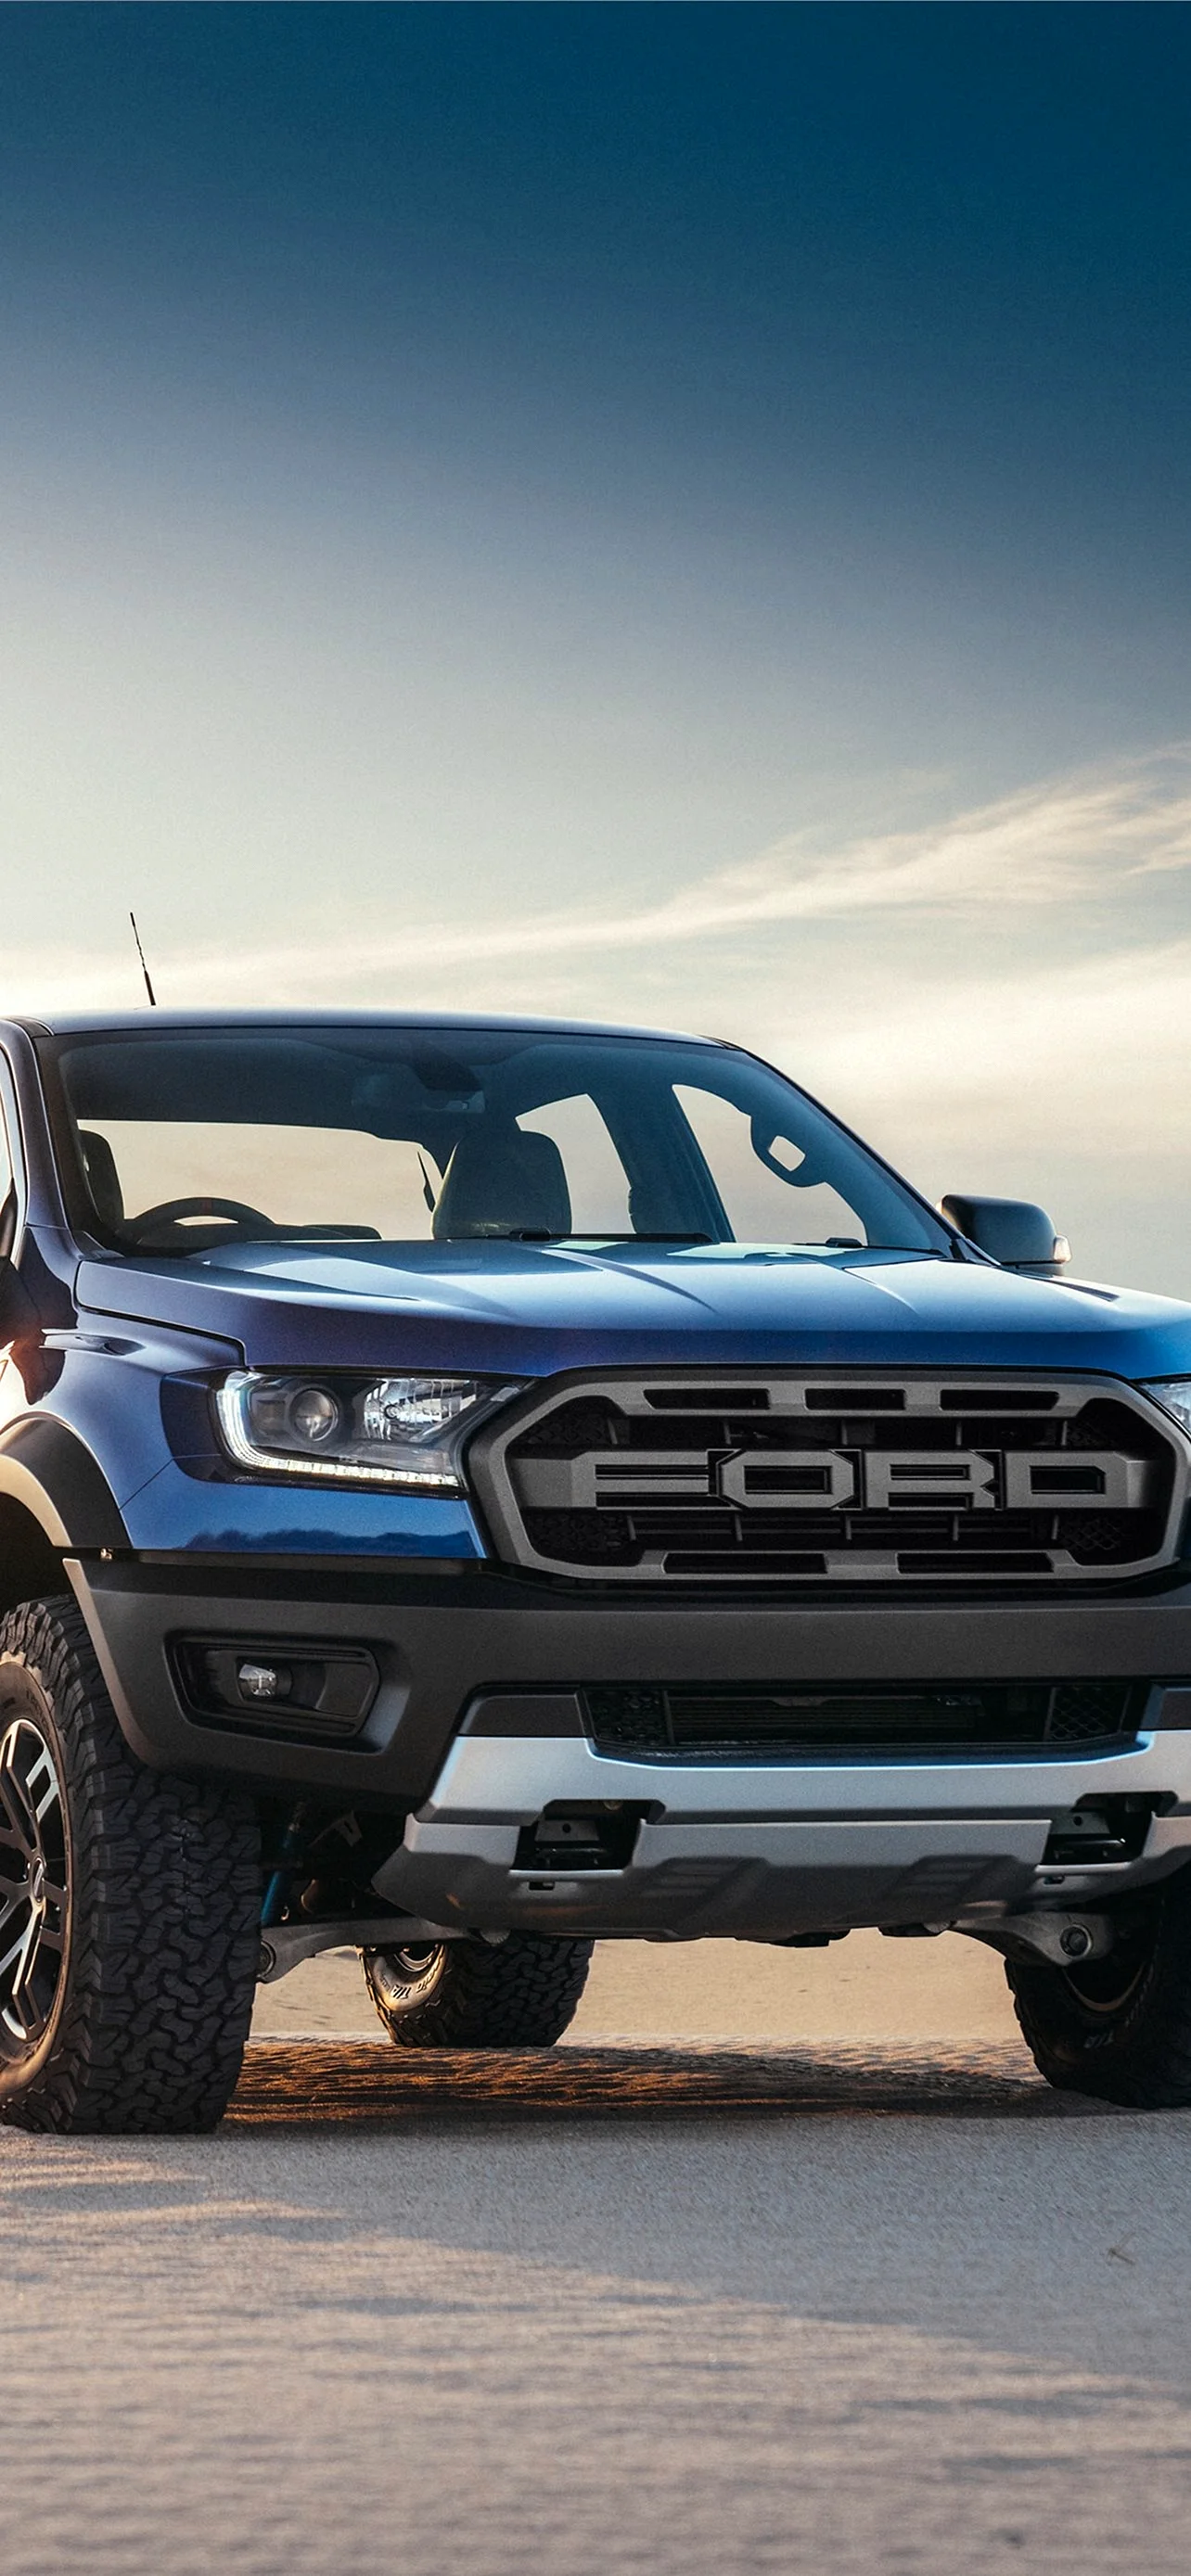 Ford Ranger 2020 Wallpaper for iPhone 13 Pro Max